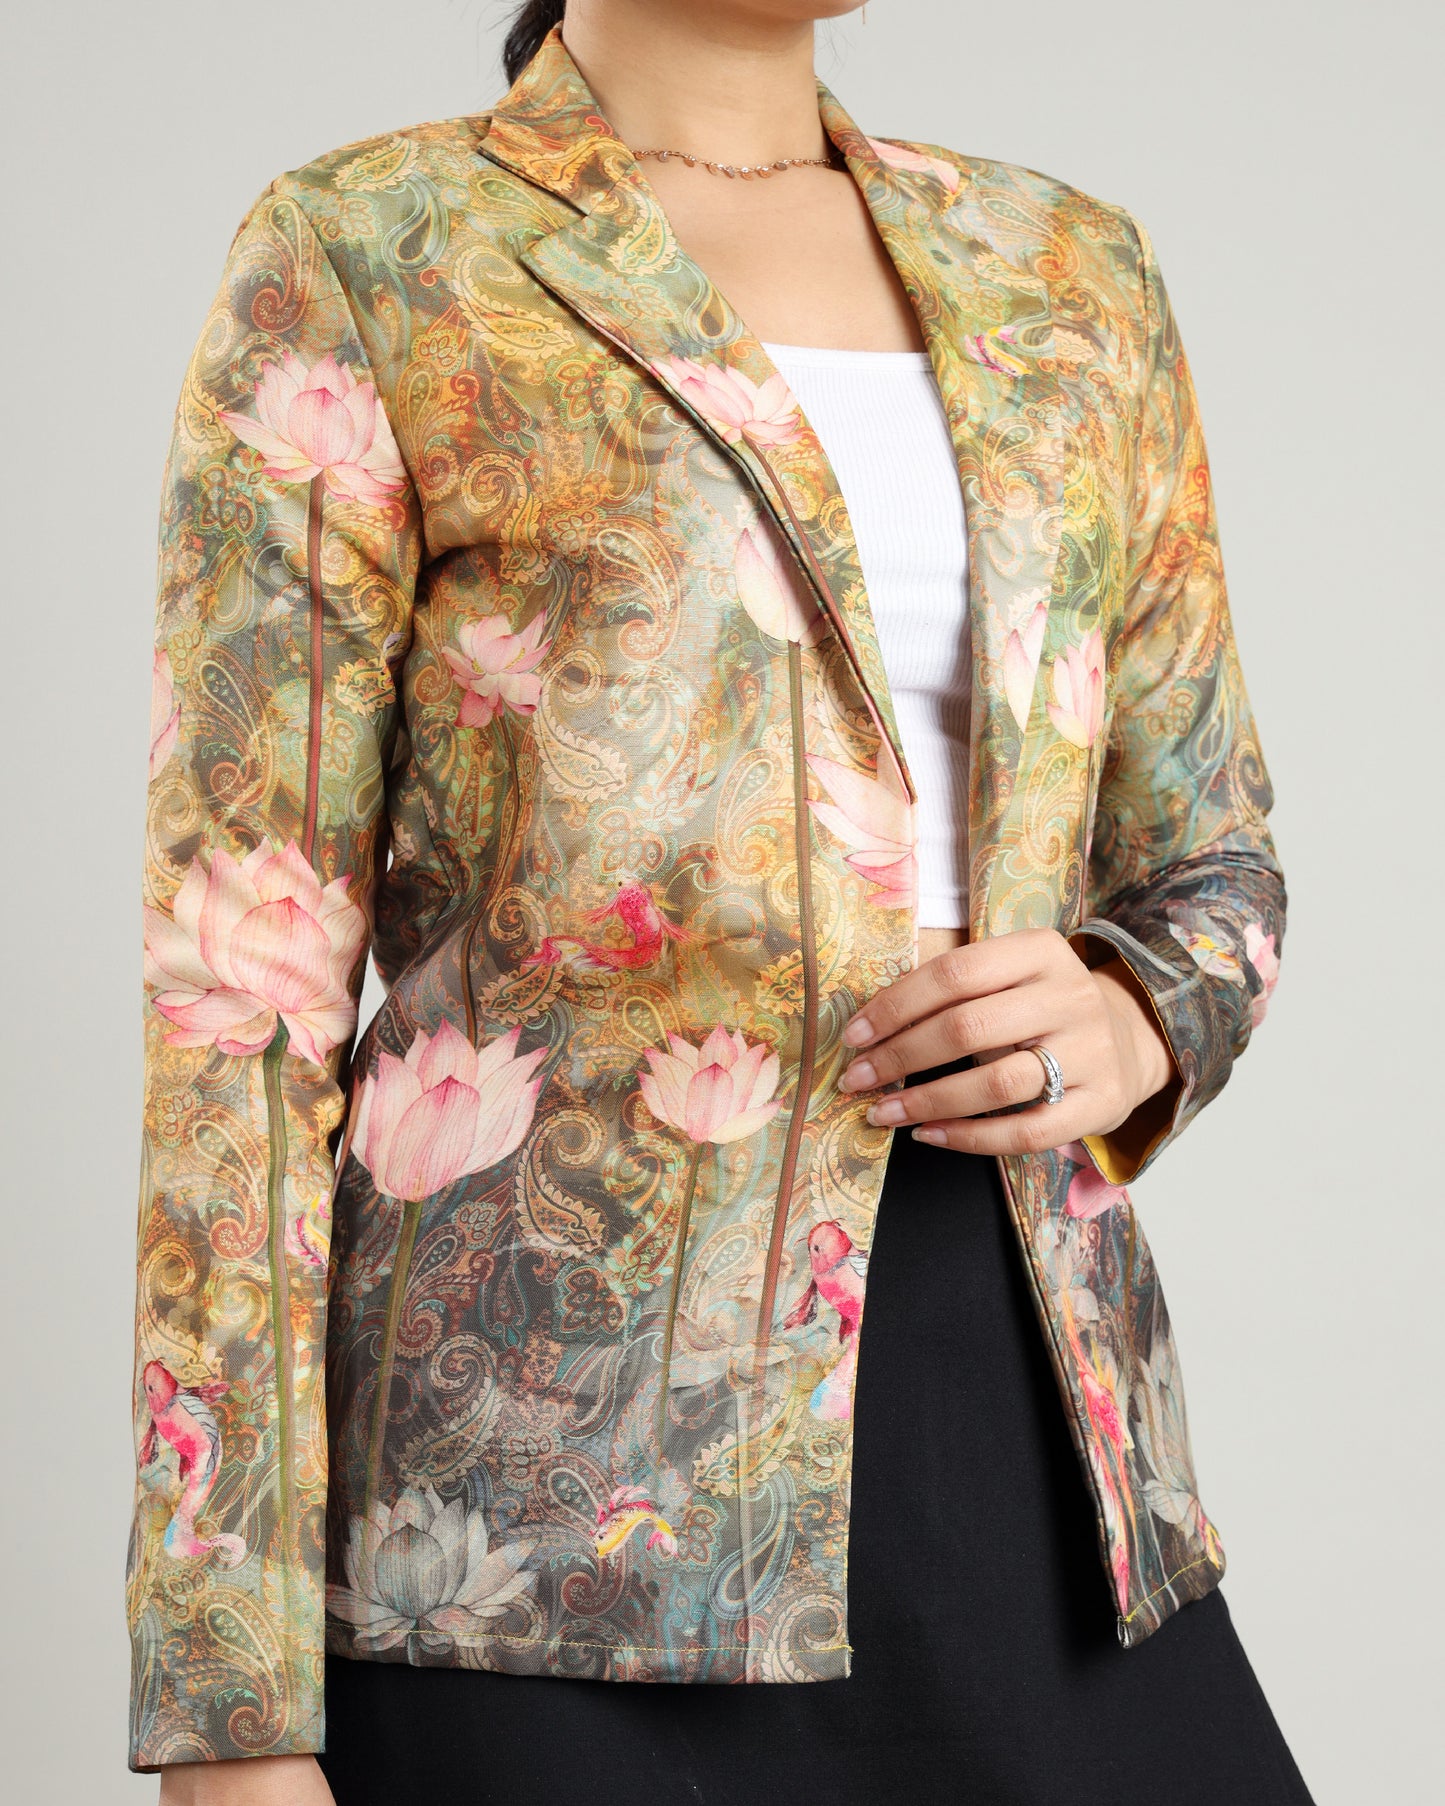 Bestselling Jacket For The Empowered Woman